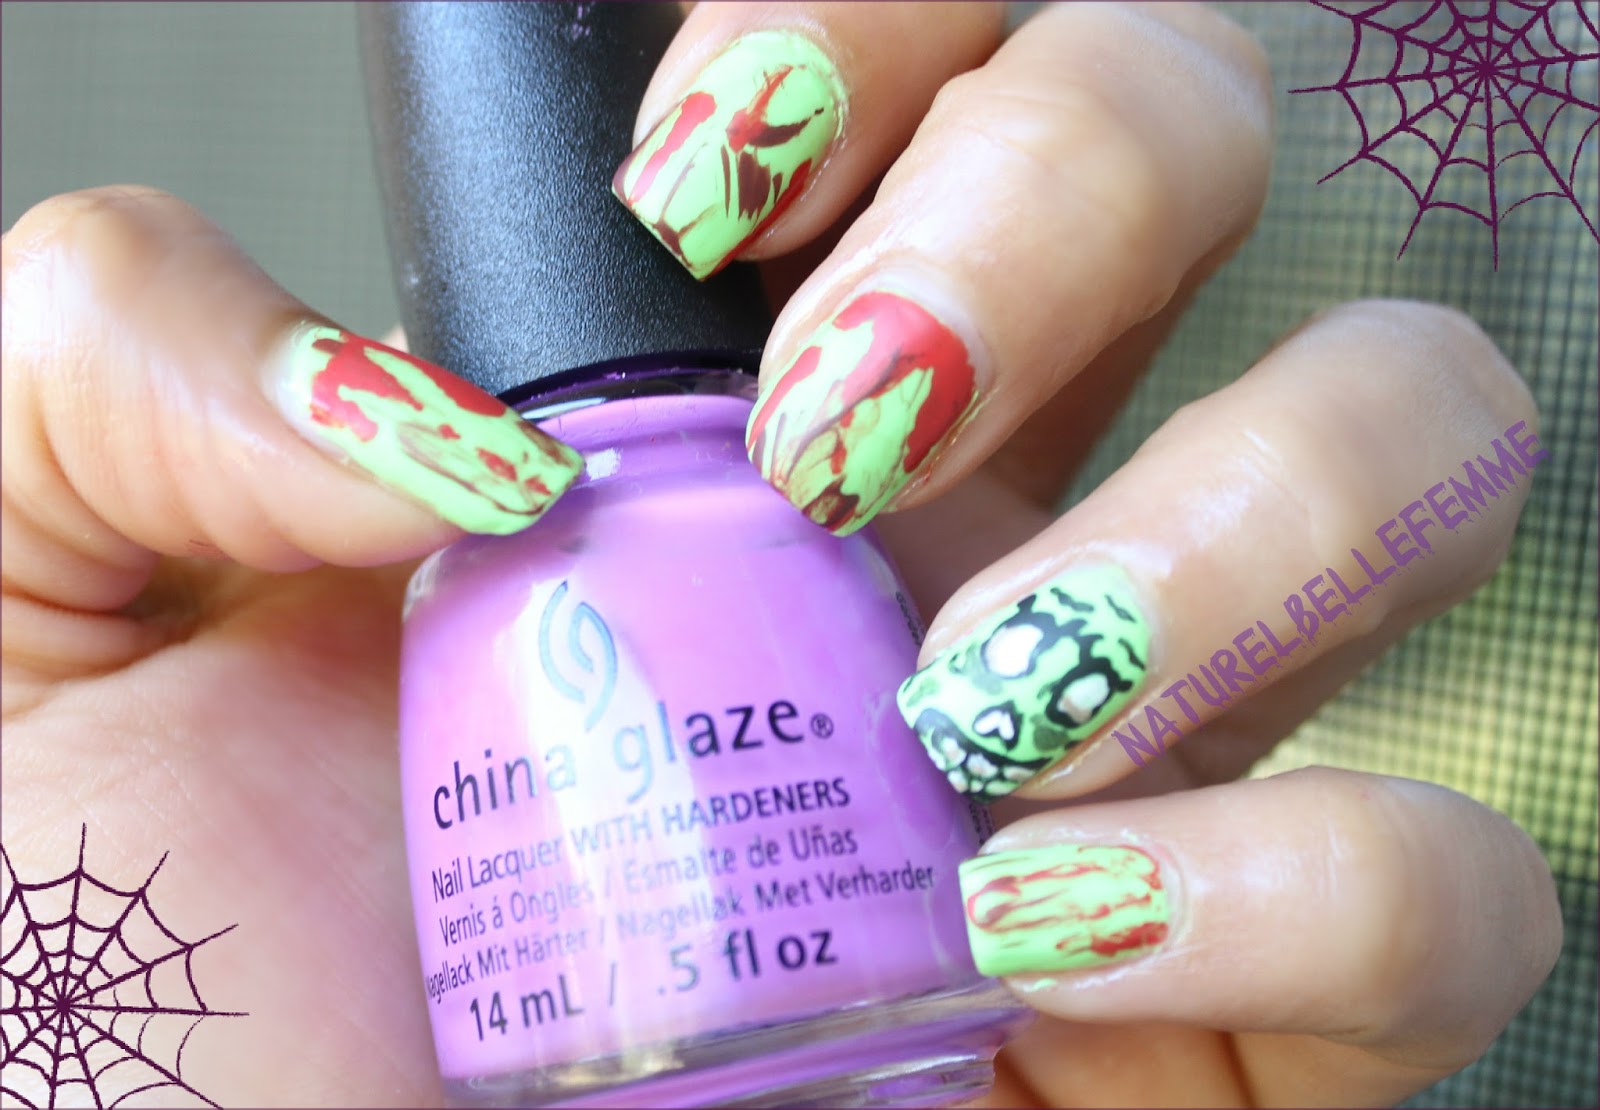 2. "Zombie nail art designs" - wide 4